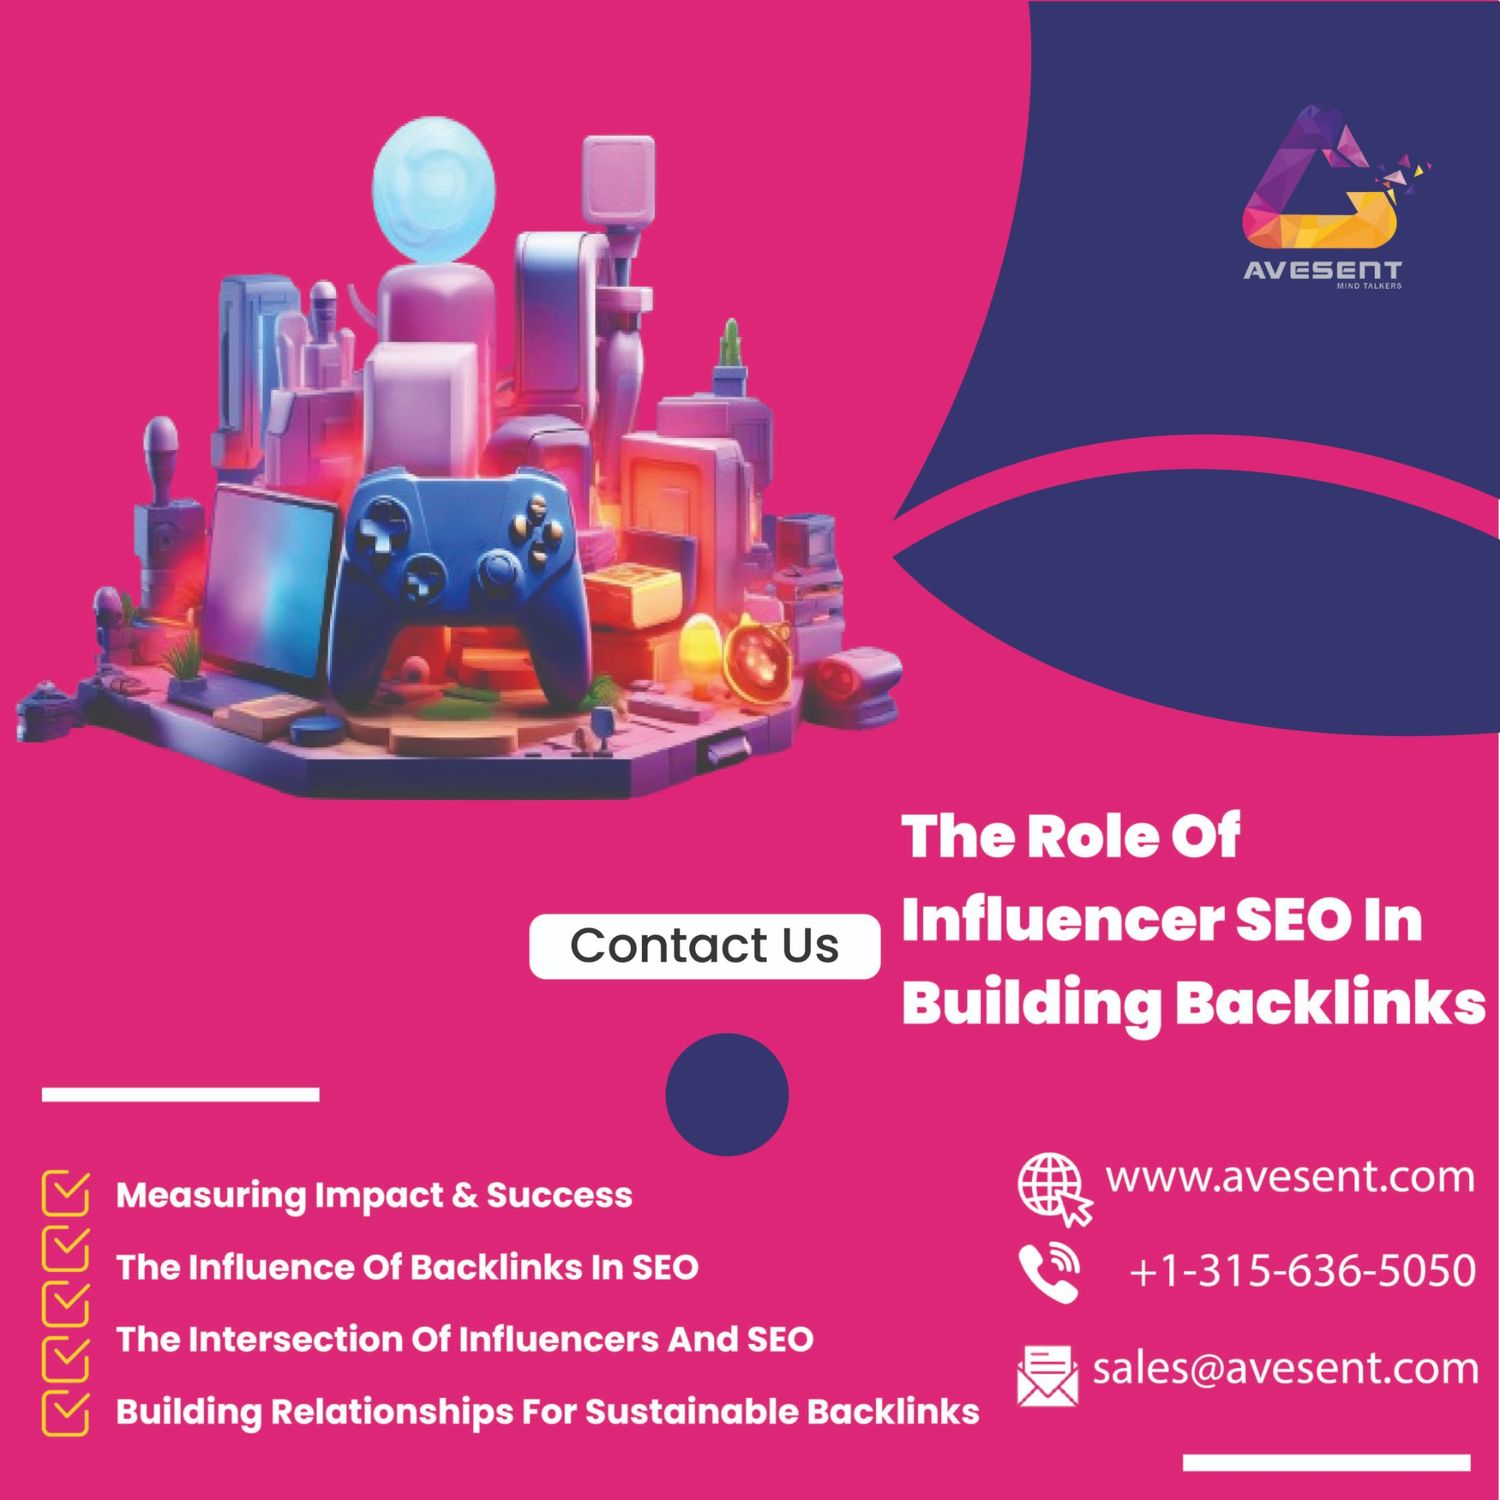 You are currently viewing The Role of Influencer SEO in Building Backlinks